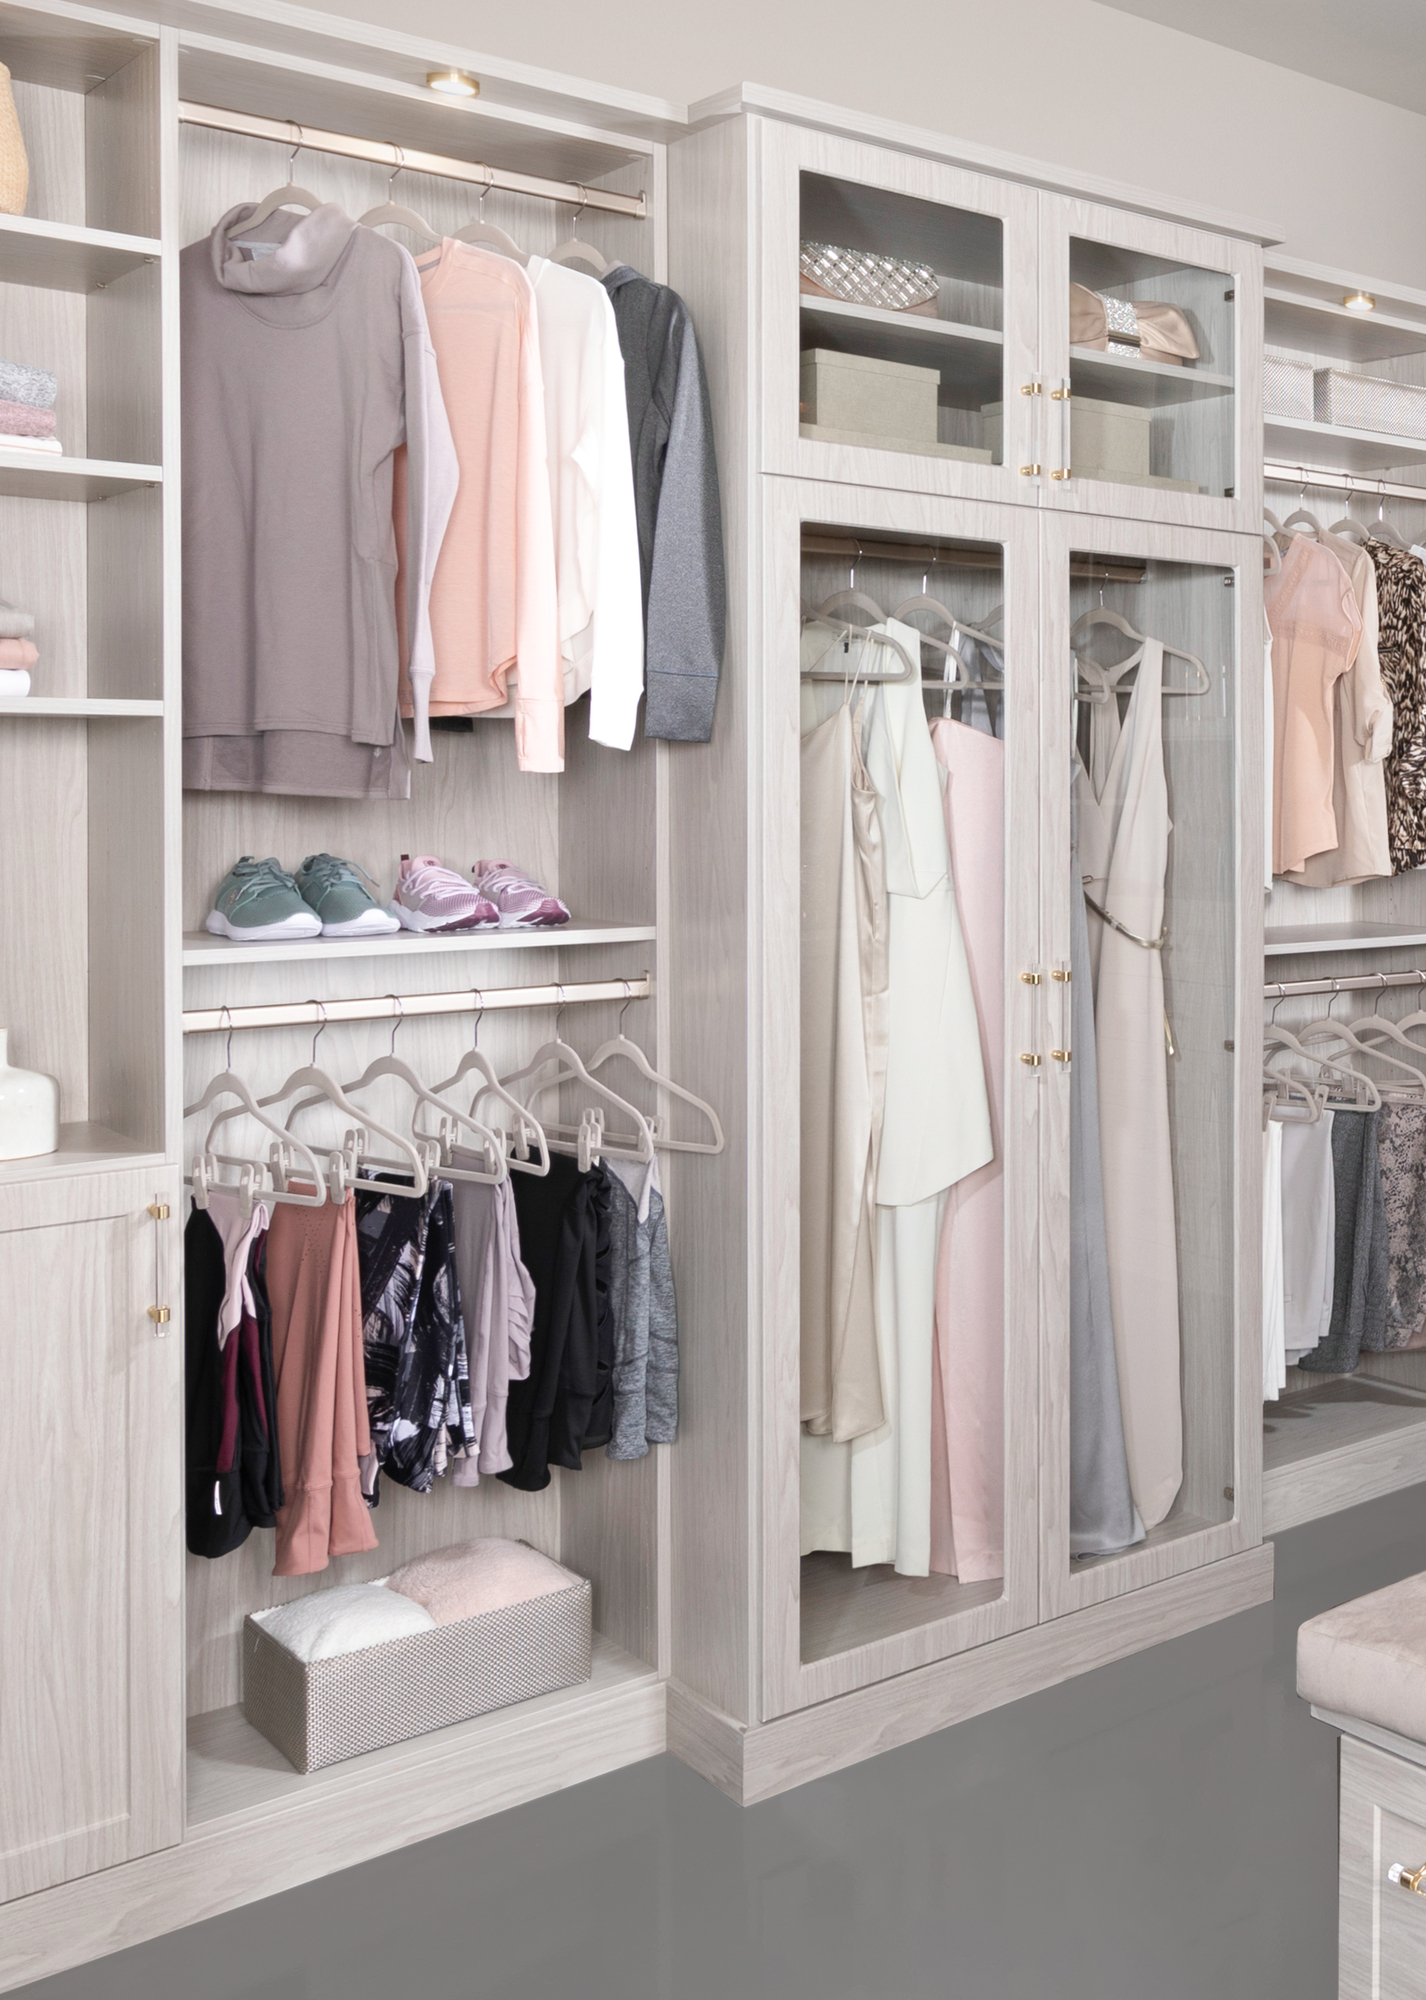 Custom closet hutch storage with hanging rods from Inspired Closets